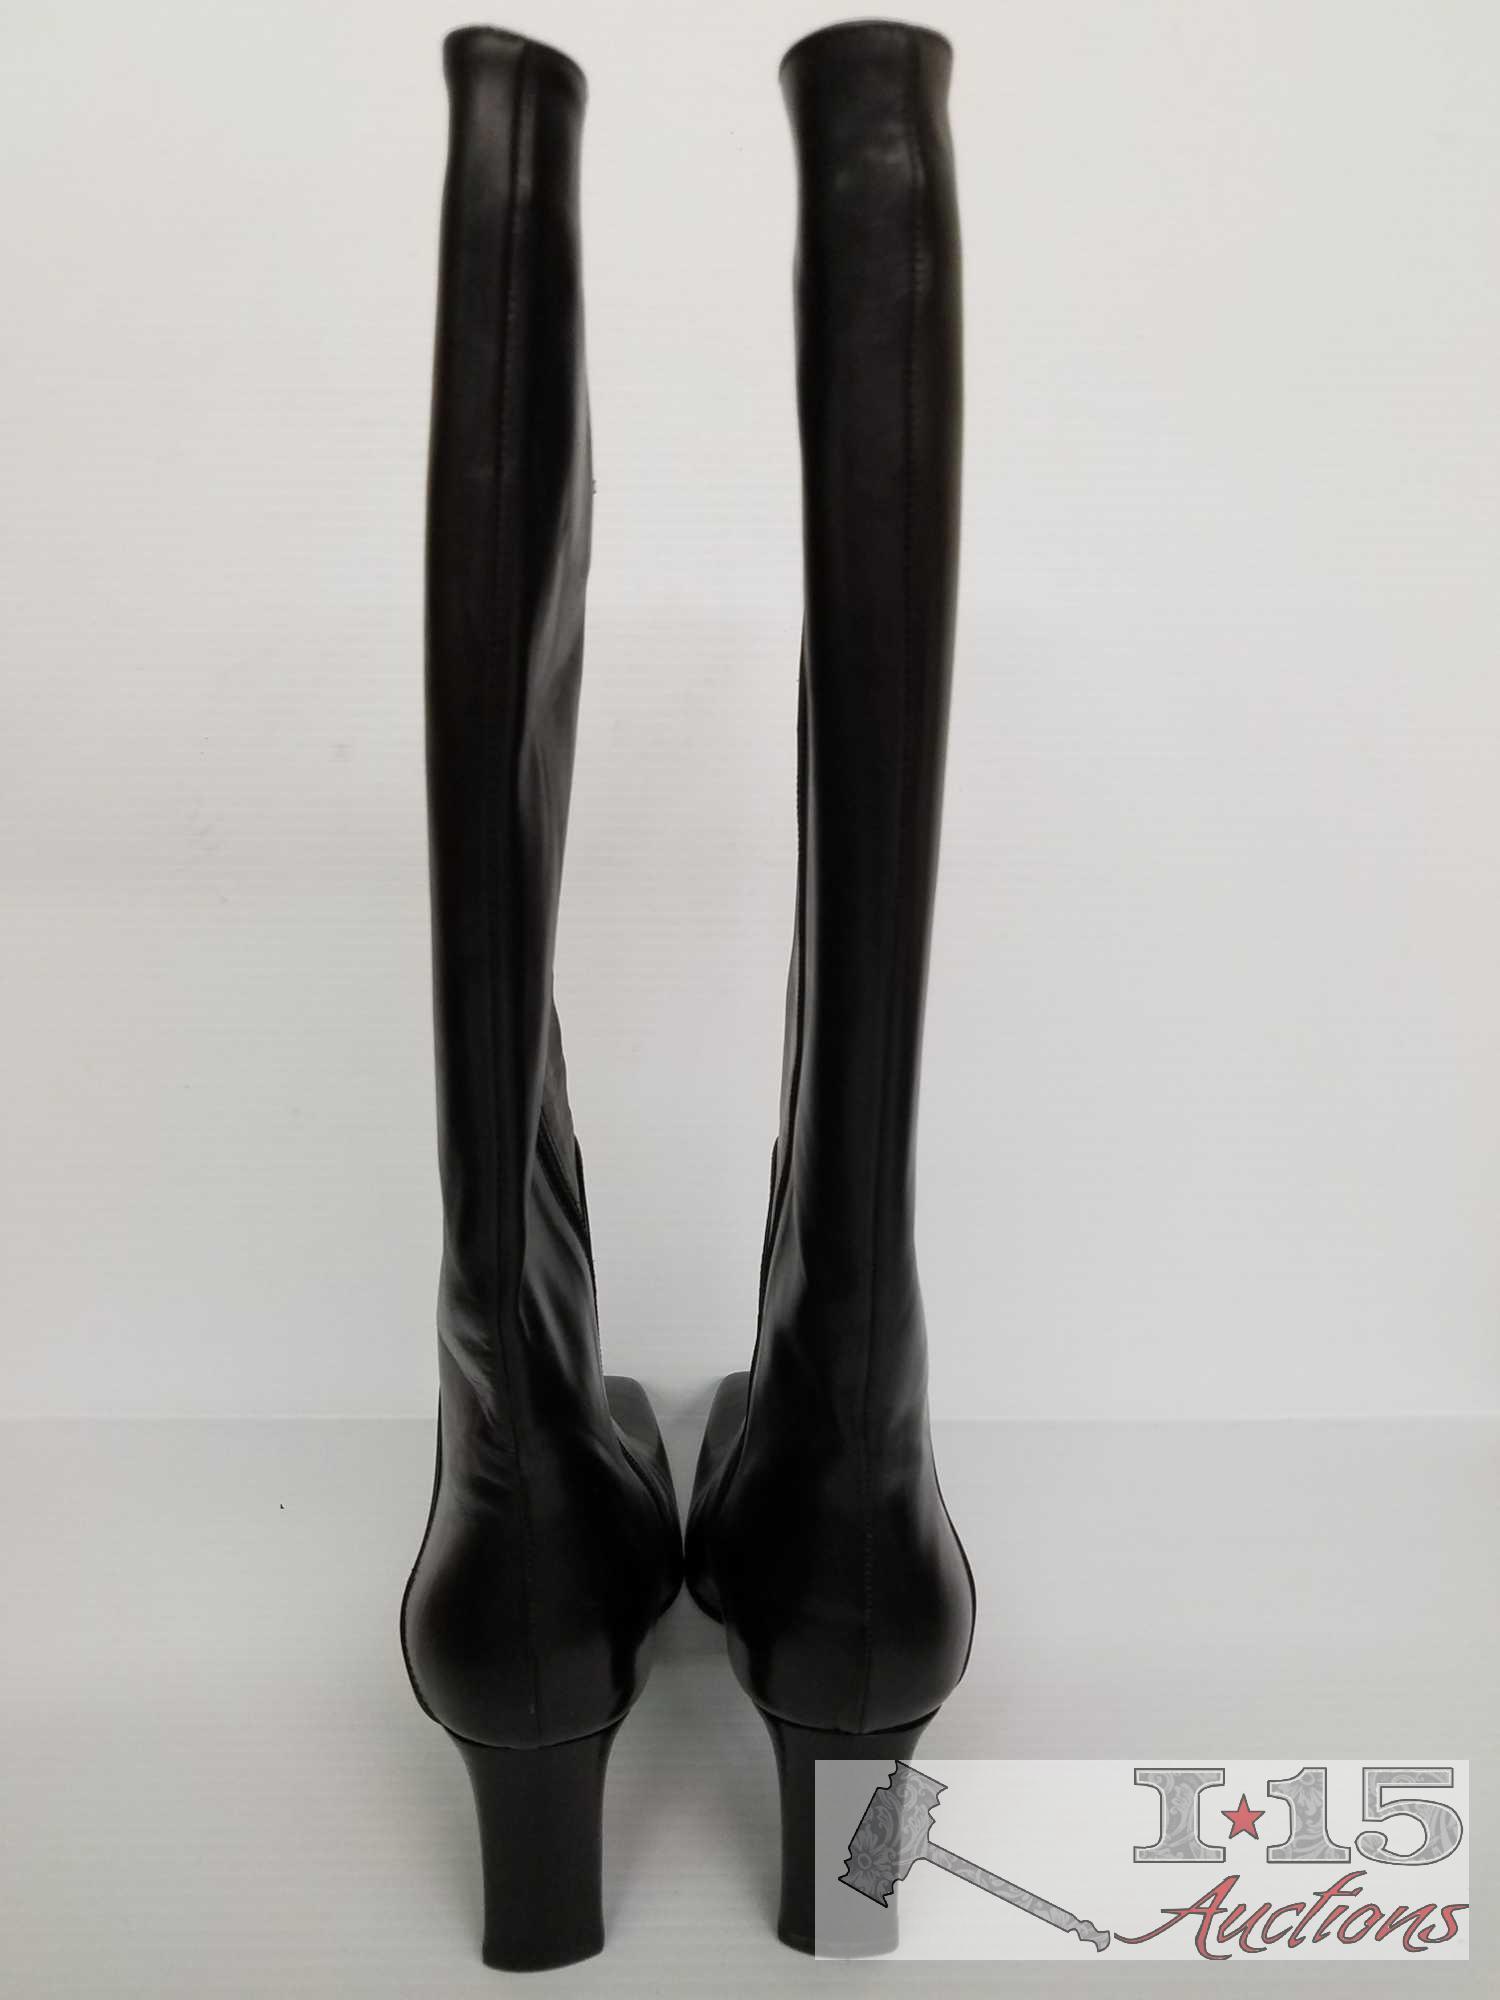 Two pairs of Black Leather Women's Designer Boots Anne Klein Size 8, Via Spiga Size 7.5